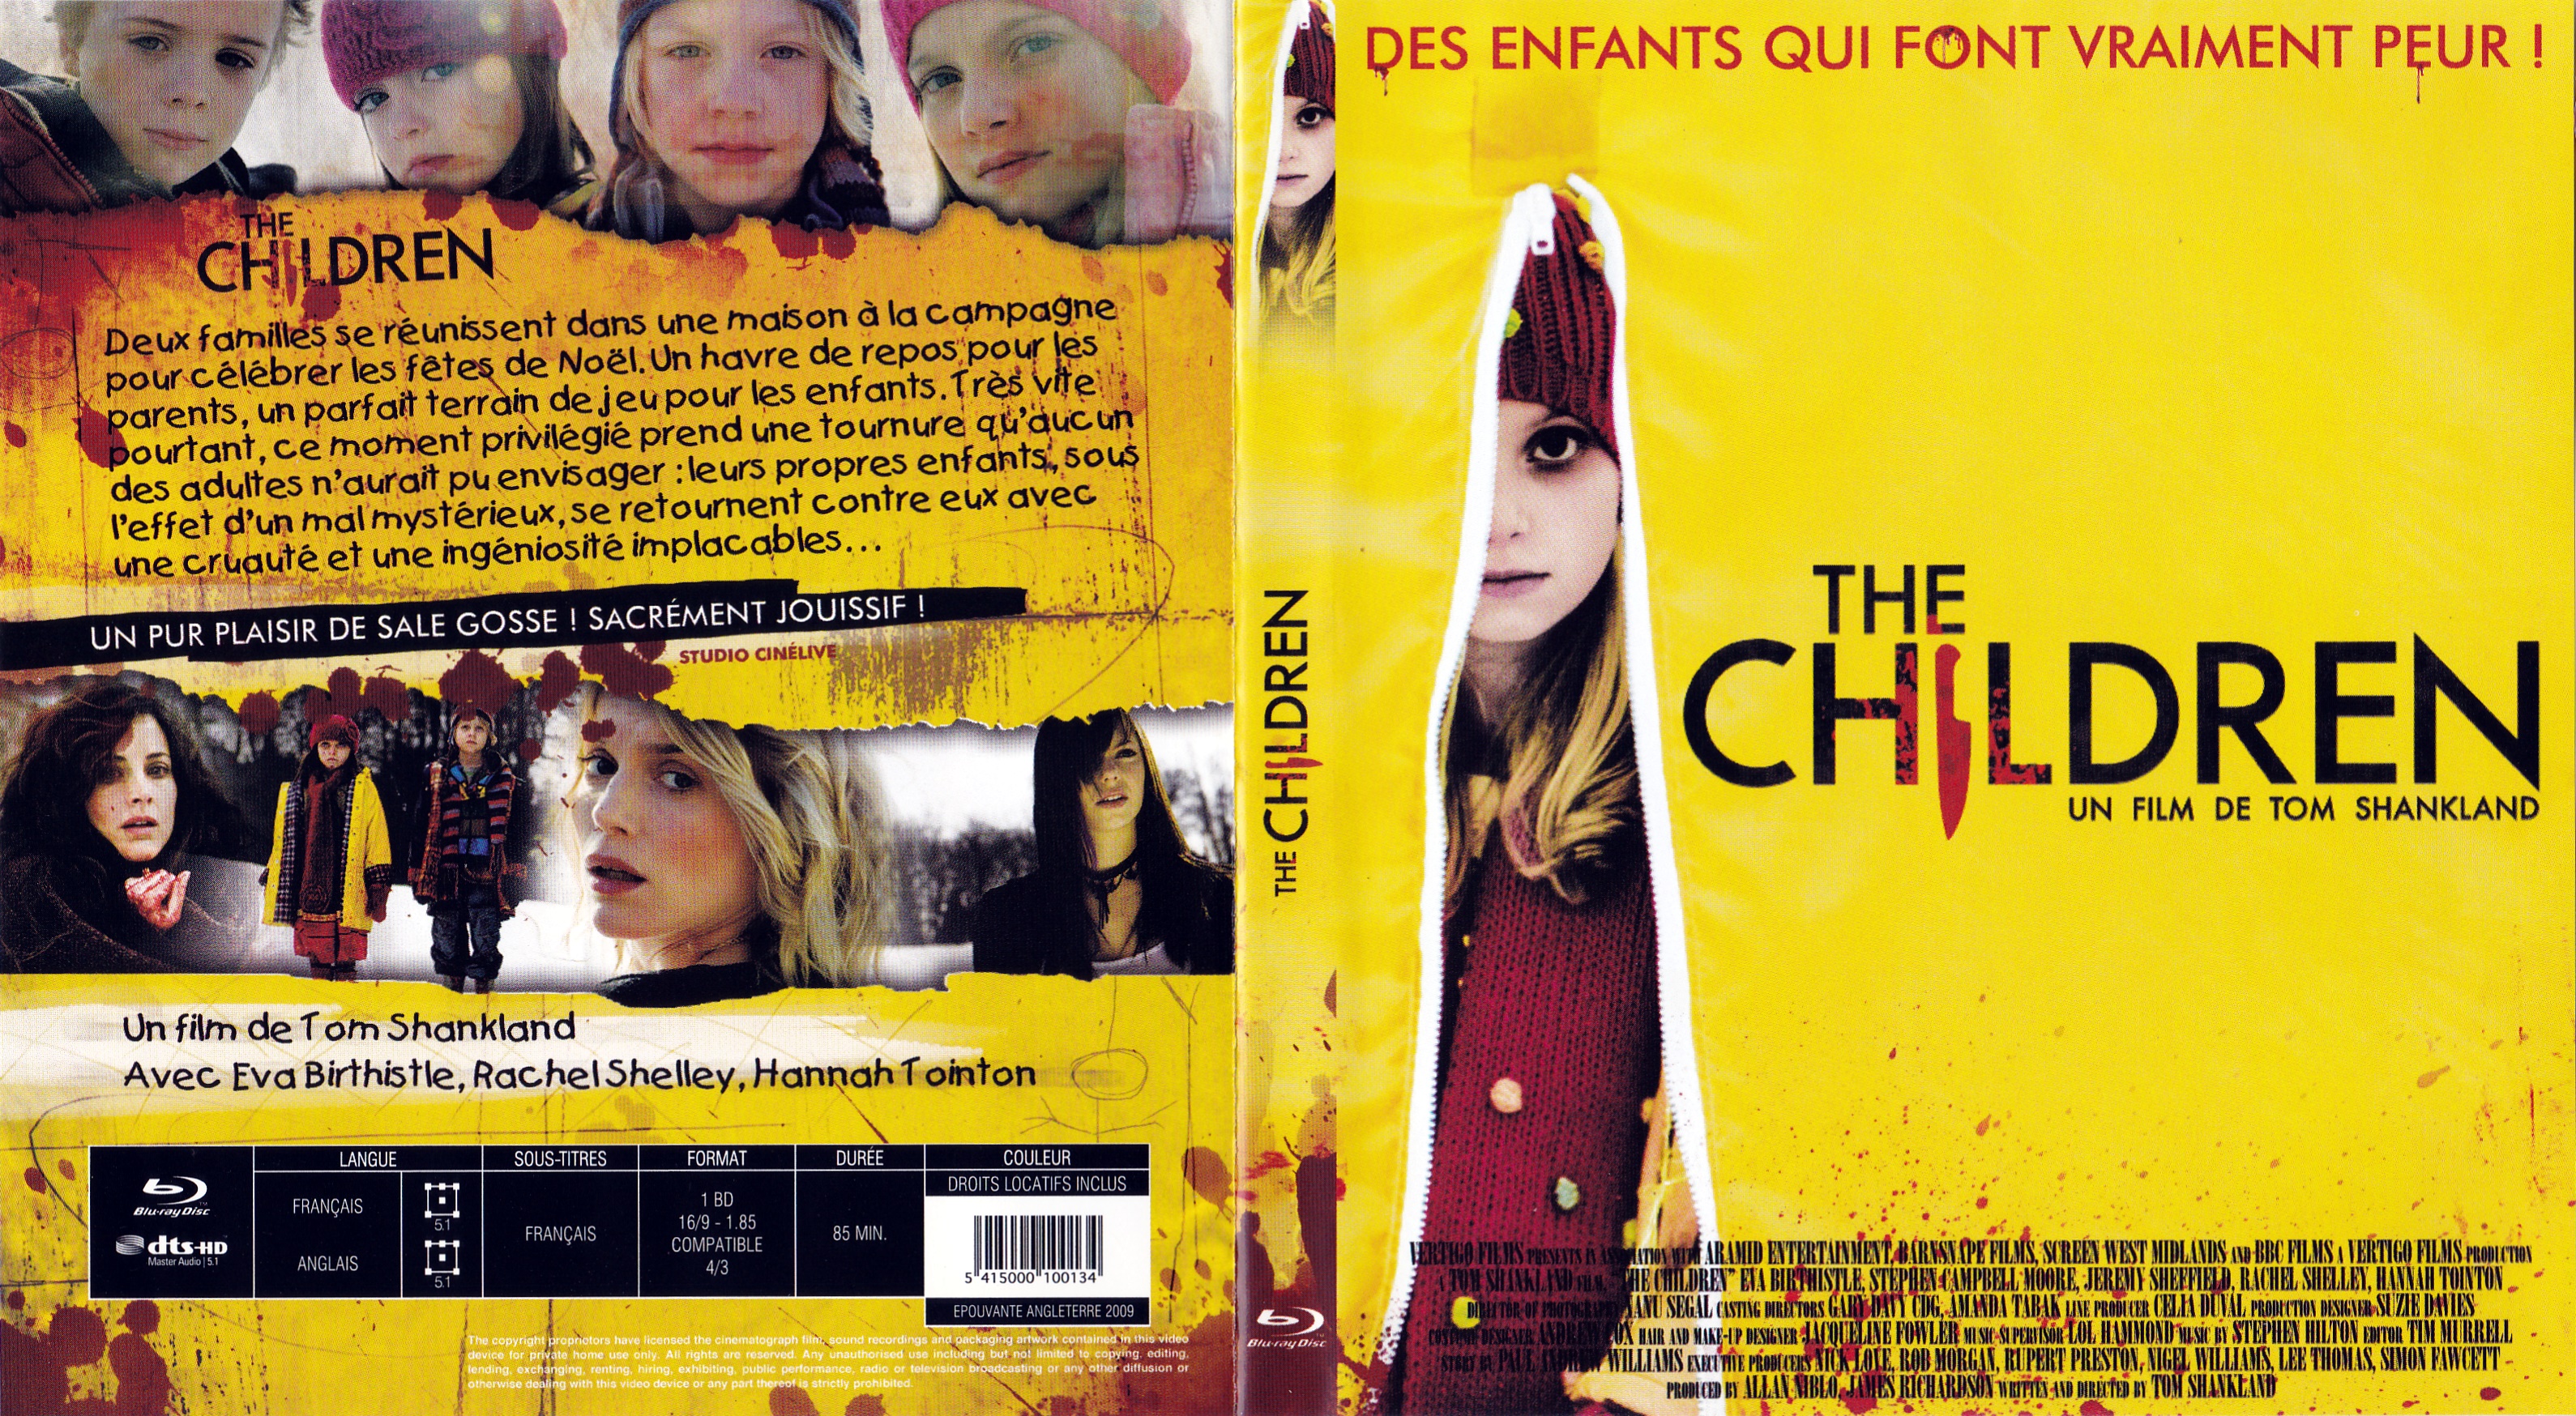 Jaquette DVD The children (BLU-RAY)